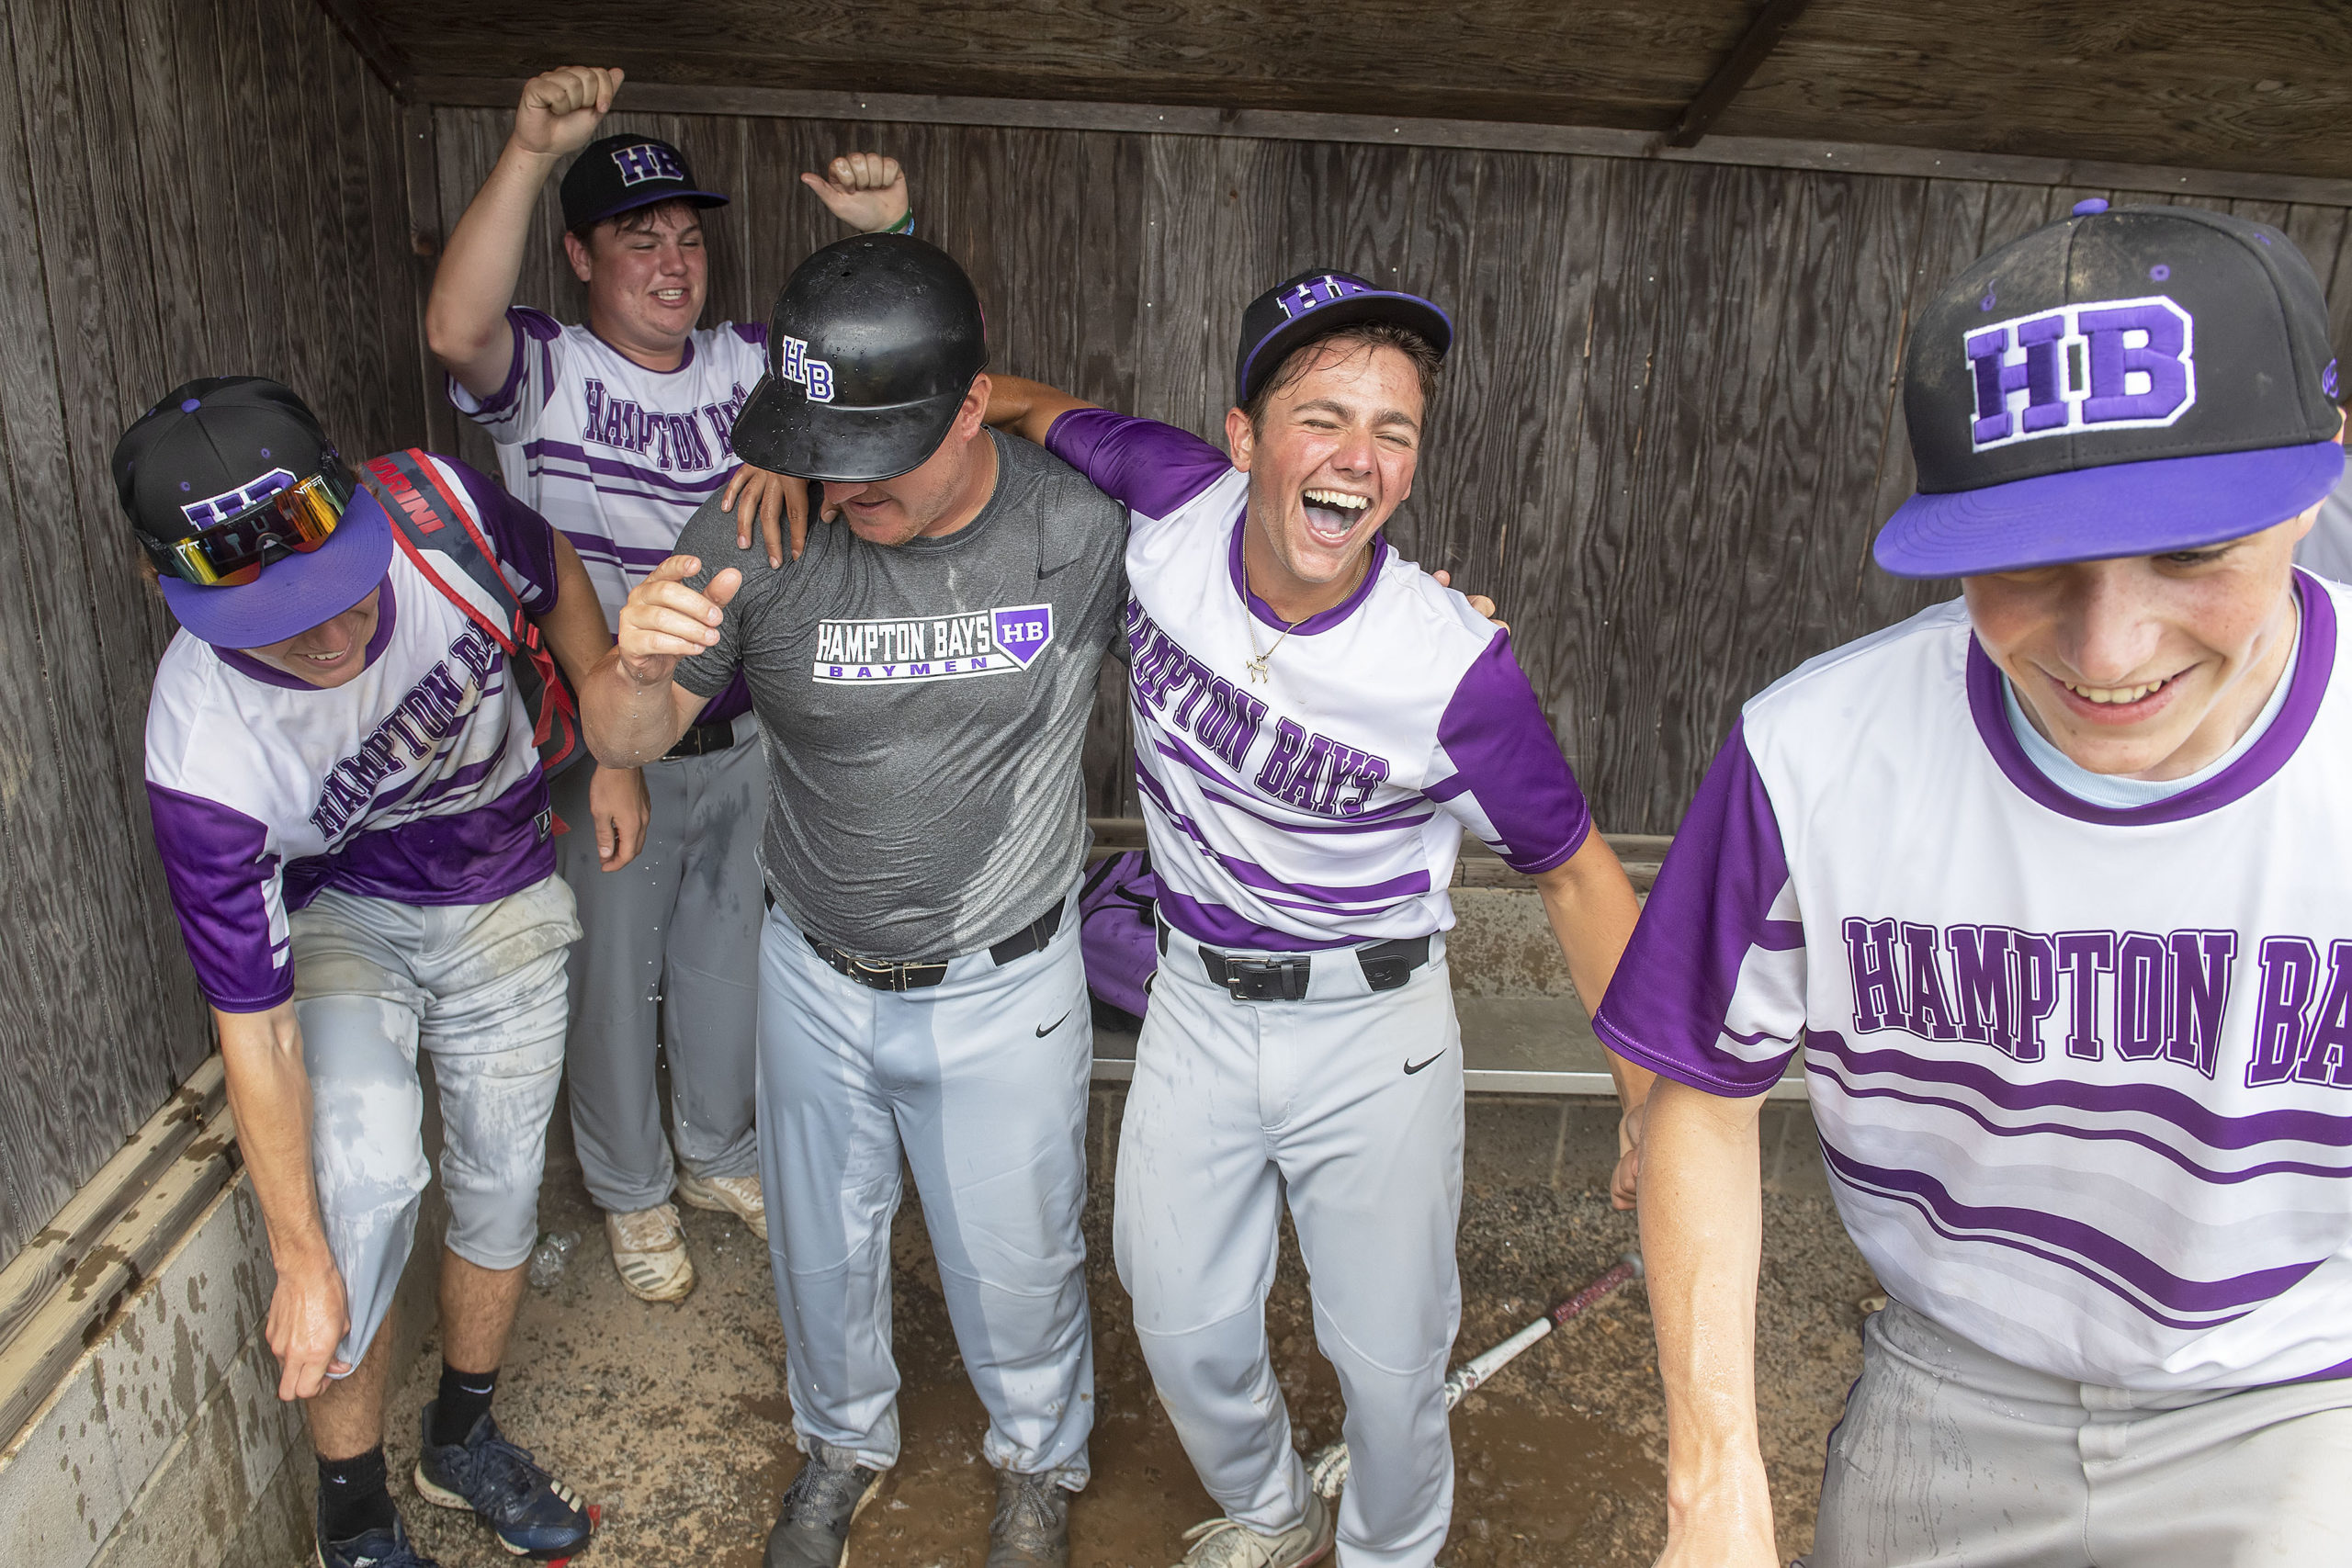 The Baymen celebrated by pouring a cooler of ice water over head coach John Foster after they defeated previously unbeaten Pierson at Mashashimuet Park in Sag Harbor on Saturday.